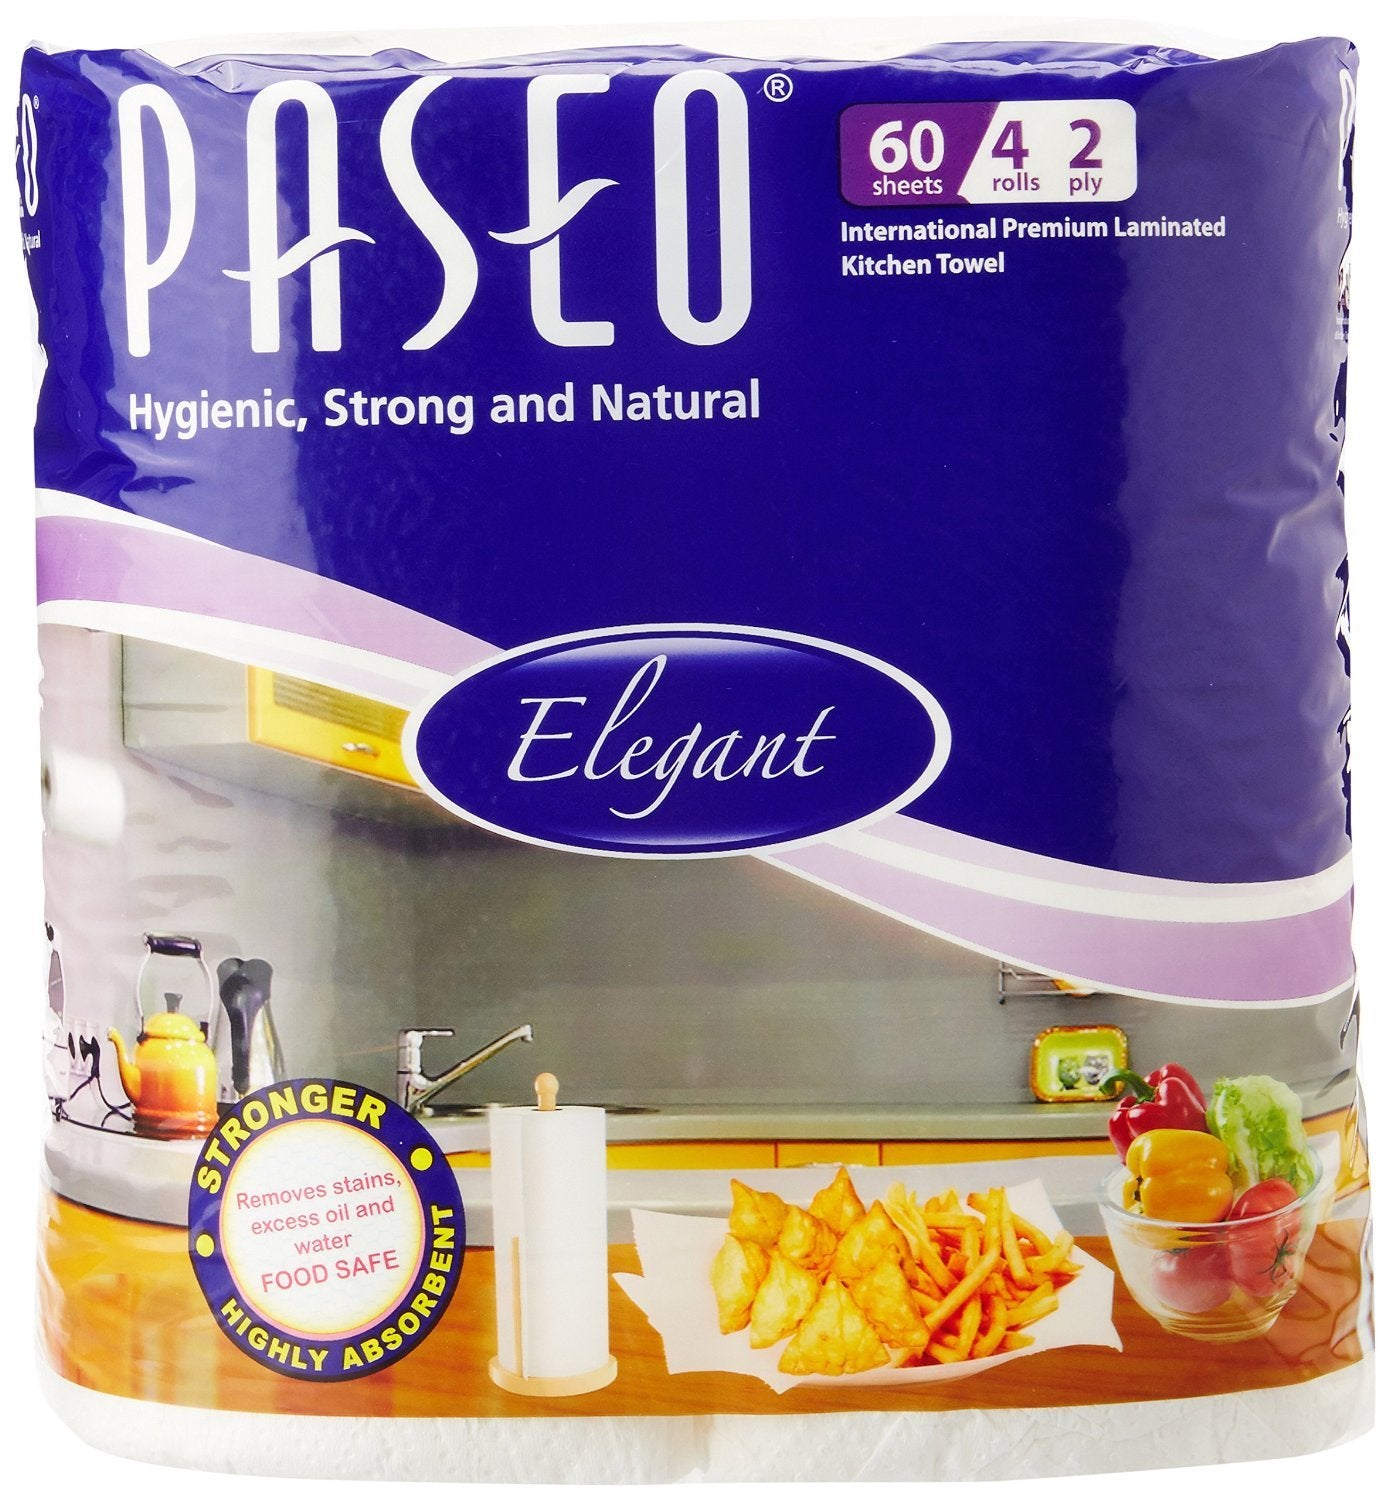 Paseo Tissues Plain Kitchen Towels - 4 Rolls (PACK OF 4)